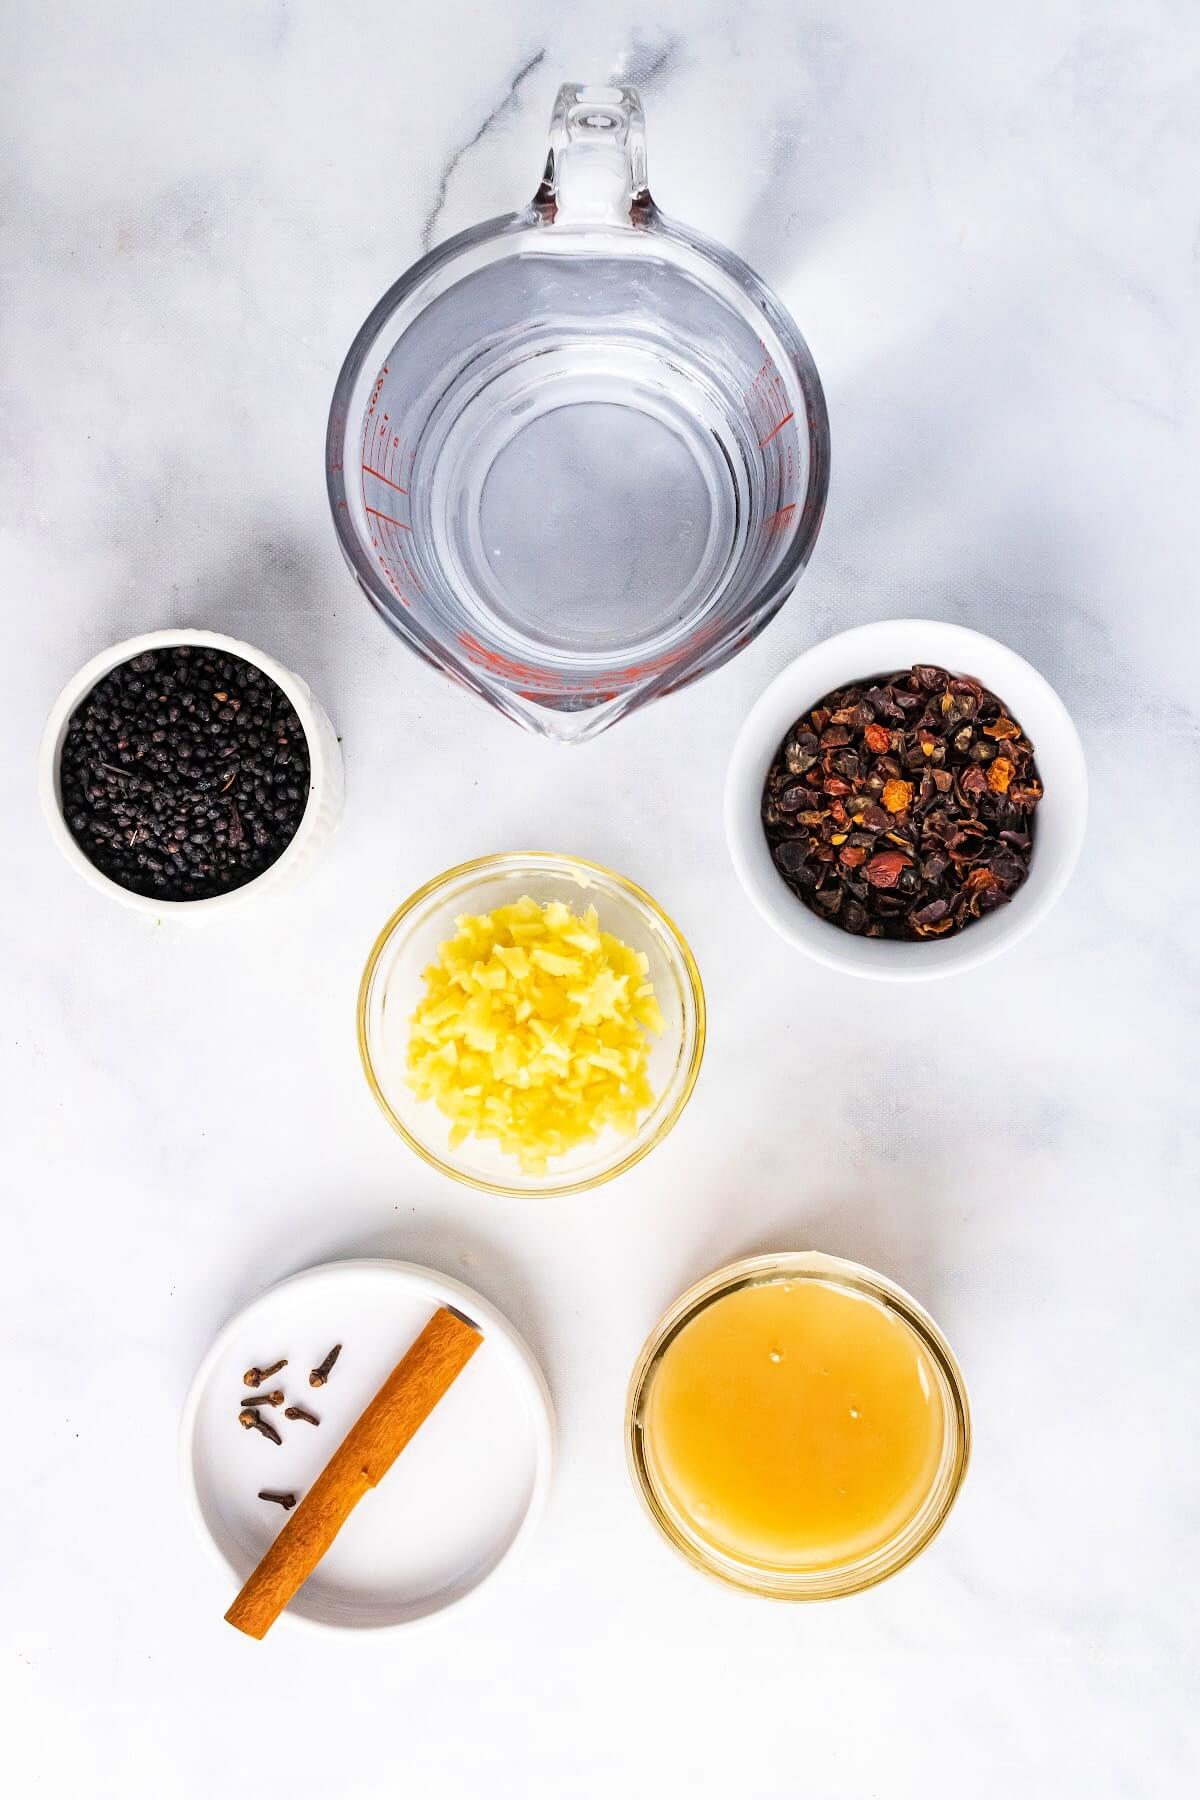 Overhead view of a glass measuring cup full of water, a small bowl filled with dried elderberries, a small bowl filled with dried rose hips, a small bowl filled with chopped fresh ginger, a small bowl filled with honey and a small dish with a cinnamon stick and whole cloves.